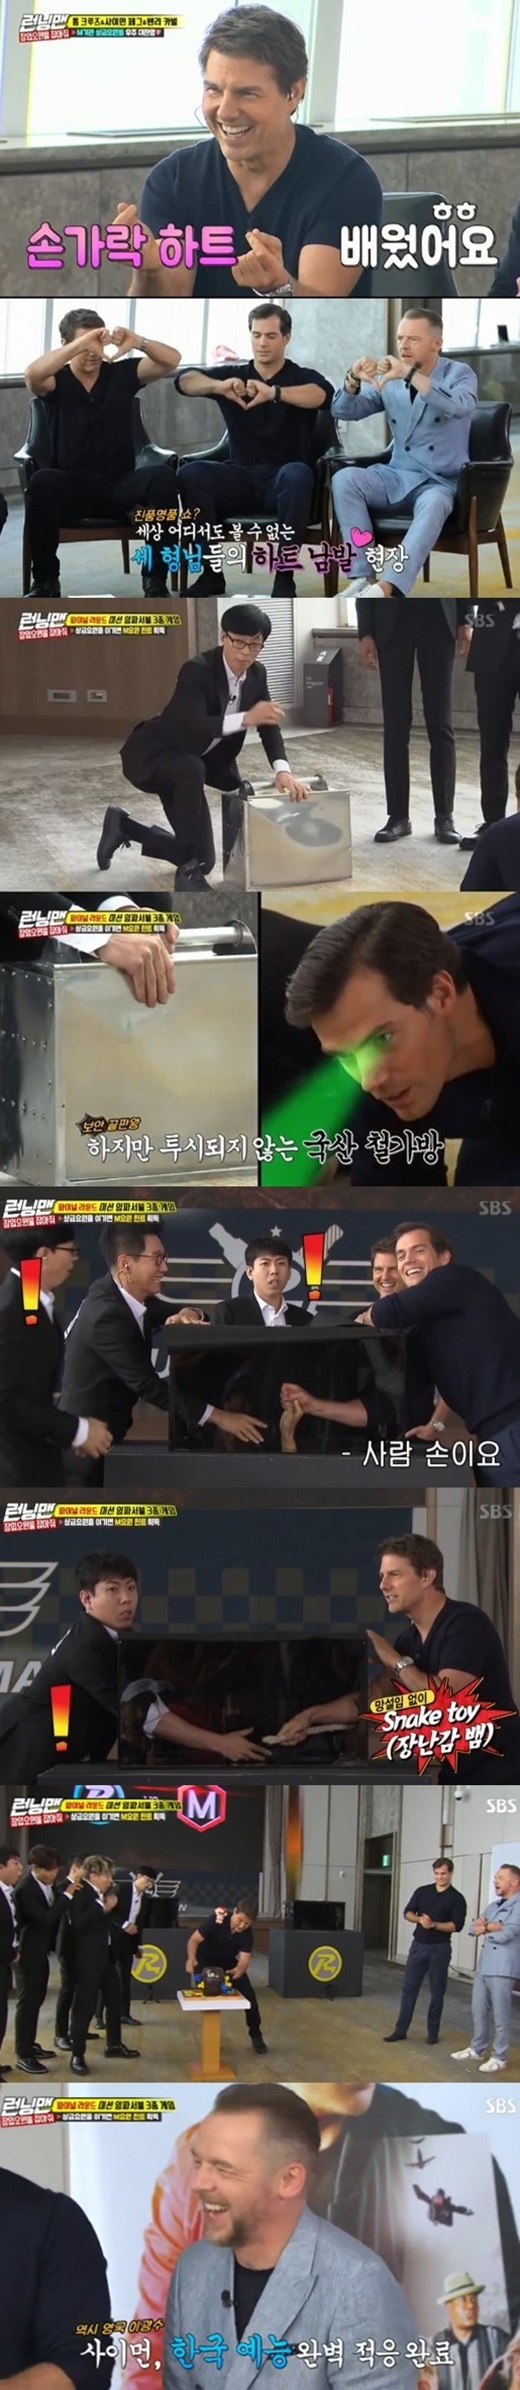 SBS Running Man topped the double-digit ratings and ranked first in the same time zone entertainment ratings.According to Nielsen Korea, the ratings agency, Running Man, which aired on the 22nd, recorded an average audience rating of 7.1% and a second part of 10% (based on households in the Seoul metropolitan area), beating MBC Masked Wang (9.7%) and KBS2 Happy Sunday (8.2%).In particular, Running Mans double-digit ratings are the second highest ratings this year, only four months after March.In addition, the target audience rating of 20-49 years old (hereinafter referred to as 2049), which is considered an important indicator of major advertising officials, also soared to 5.7%, lightly beating Happy Sunday (4.1%) and Masked Wang (2.6%) which were broadcast on the same time zone.The figure is the record of the 2049 rating TOP 3 throughout the entertainment/culture program broadcast on the day.On the day of the show, Tom Cruise, Henry Carville and Simon Pegg, the actors of the movie Mission Impossible: Fall Out, which became a hot topic only with trailers, appeared in a surprise appearance.Hold me on to Project 2: Hold the infiltrators.Tom Cruise, who was the ninth to visit Korea, said, I am so glad to be able to come out of Running Man. Henry Carville, who visited Korea for the first time, said, I am so excited and excited.Thank you for inviting me. Simon Pegg also enthused the members of Running Man with his unexpected finger heart attack, saying, Im enjoying this time for my second visit to Korea.Tom Cruise and Henry Carville also joined the Heart Attack and created various hearts and laughed.The final match between the members of Running Man and Mission Impossible was held. Although it was a limited recording time, the members of Mission surprised everyone with their Game fighting.In the Iron Bag Quiz, he did not mind lying on the floor, he wrote Trick Operation, and he overpowered the Running Man members with his best efforts in every Game.Tom Cruise played the Game of Uncle Tong, up to 11.6%, and took the best one minute.Tom Cruise said, It was a really fun time.The members of Running Man are great, he said, and the members thanked the three actors for presenting the signature name tag of Running Man as a gift.